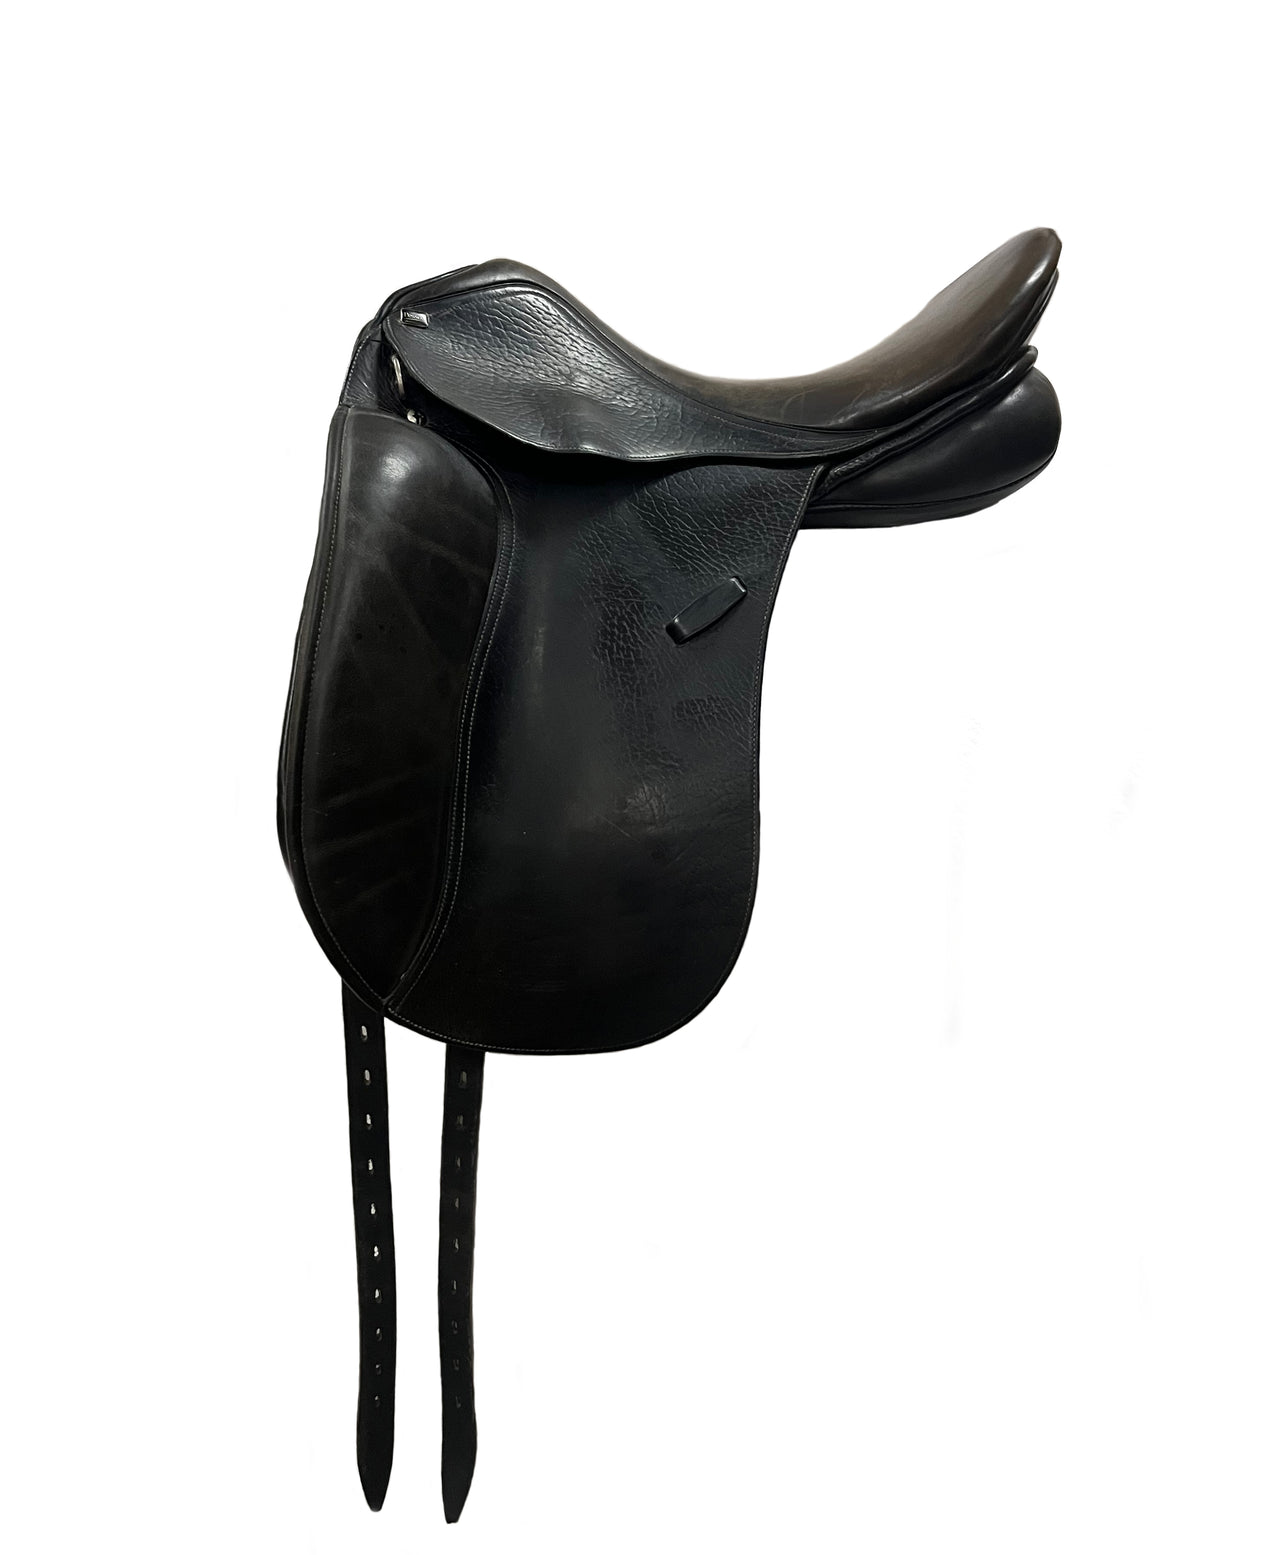 Pessoa Dressage 17.5 Inch Second Hand - The Trading Stables